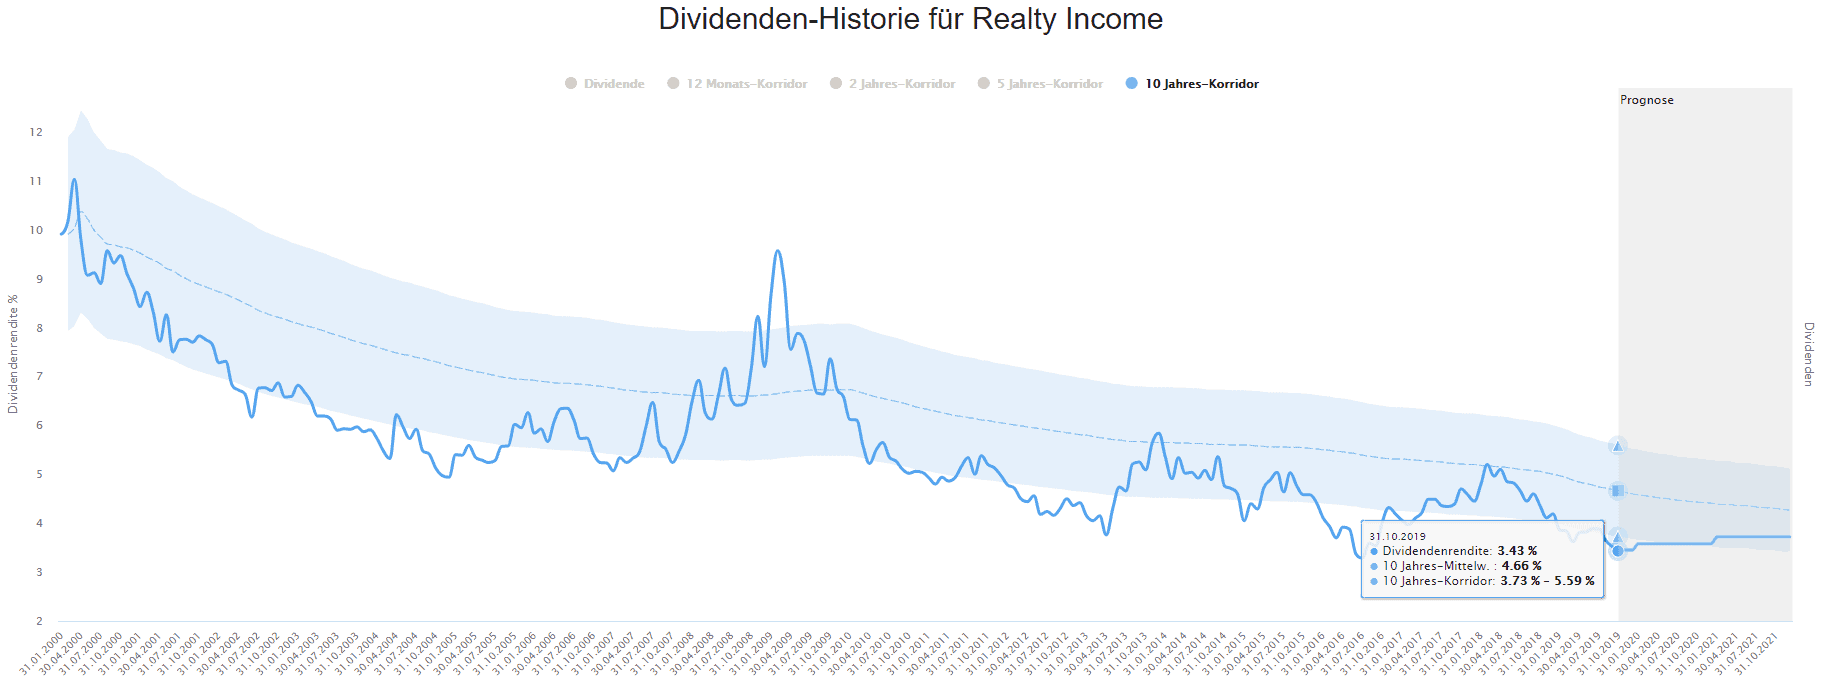 Realty Income im Dividenden-Turbo